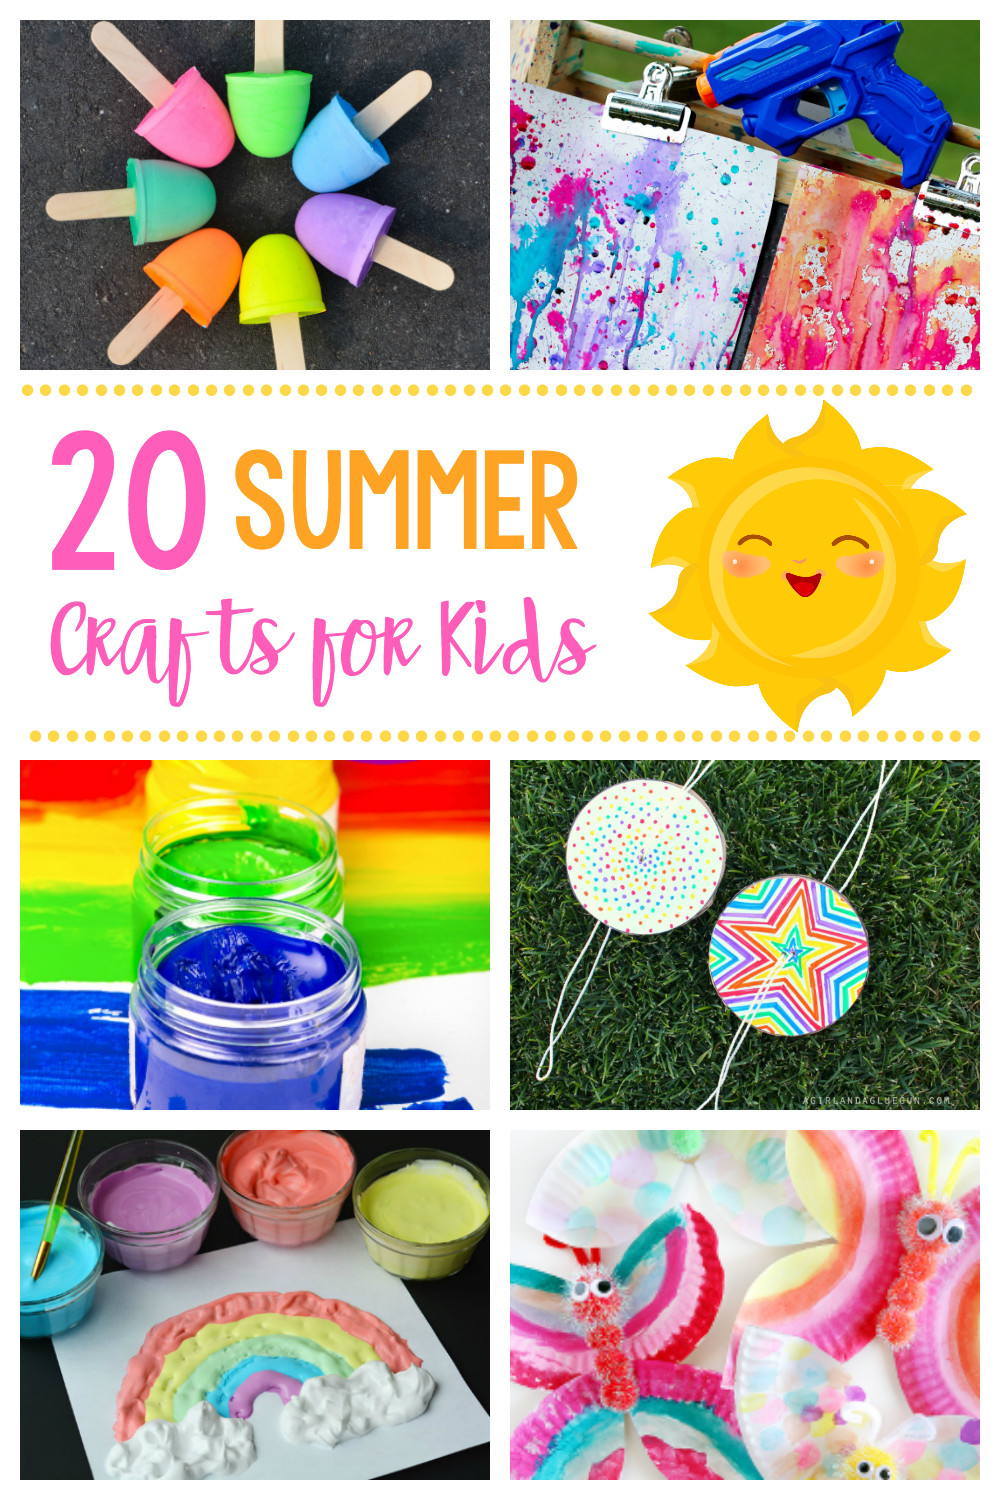 Fun Summer Crafts For Kids
 20 Simple & Fun Summer Crafts for Kids